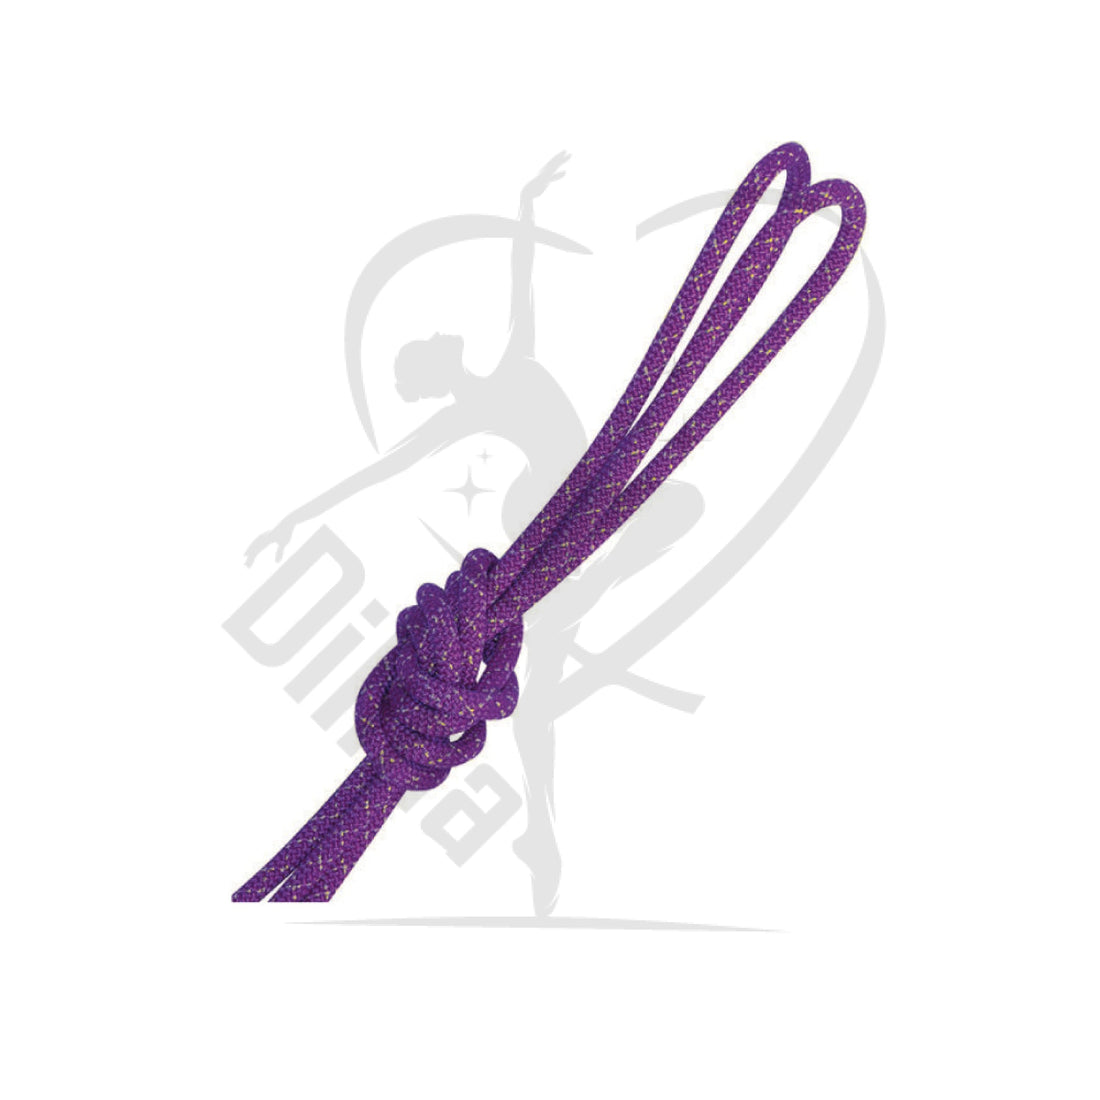 Pastorelli Metallic Gym Rope For Competitions Mod. New Orleans Violet With Gold Lame Threads Ropes